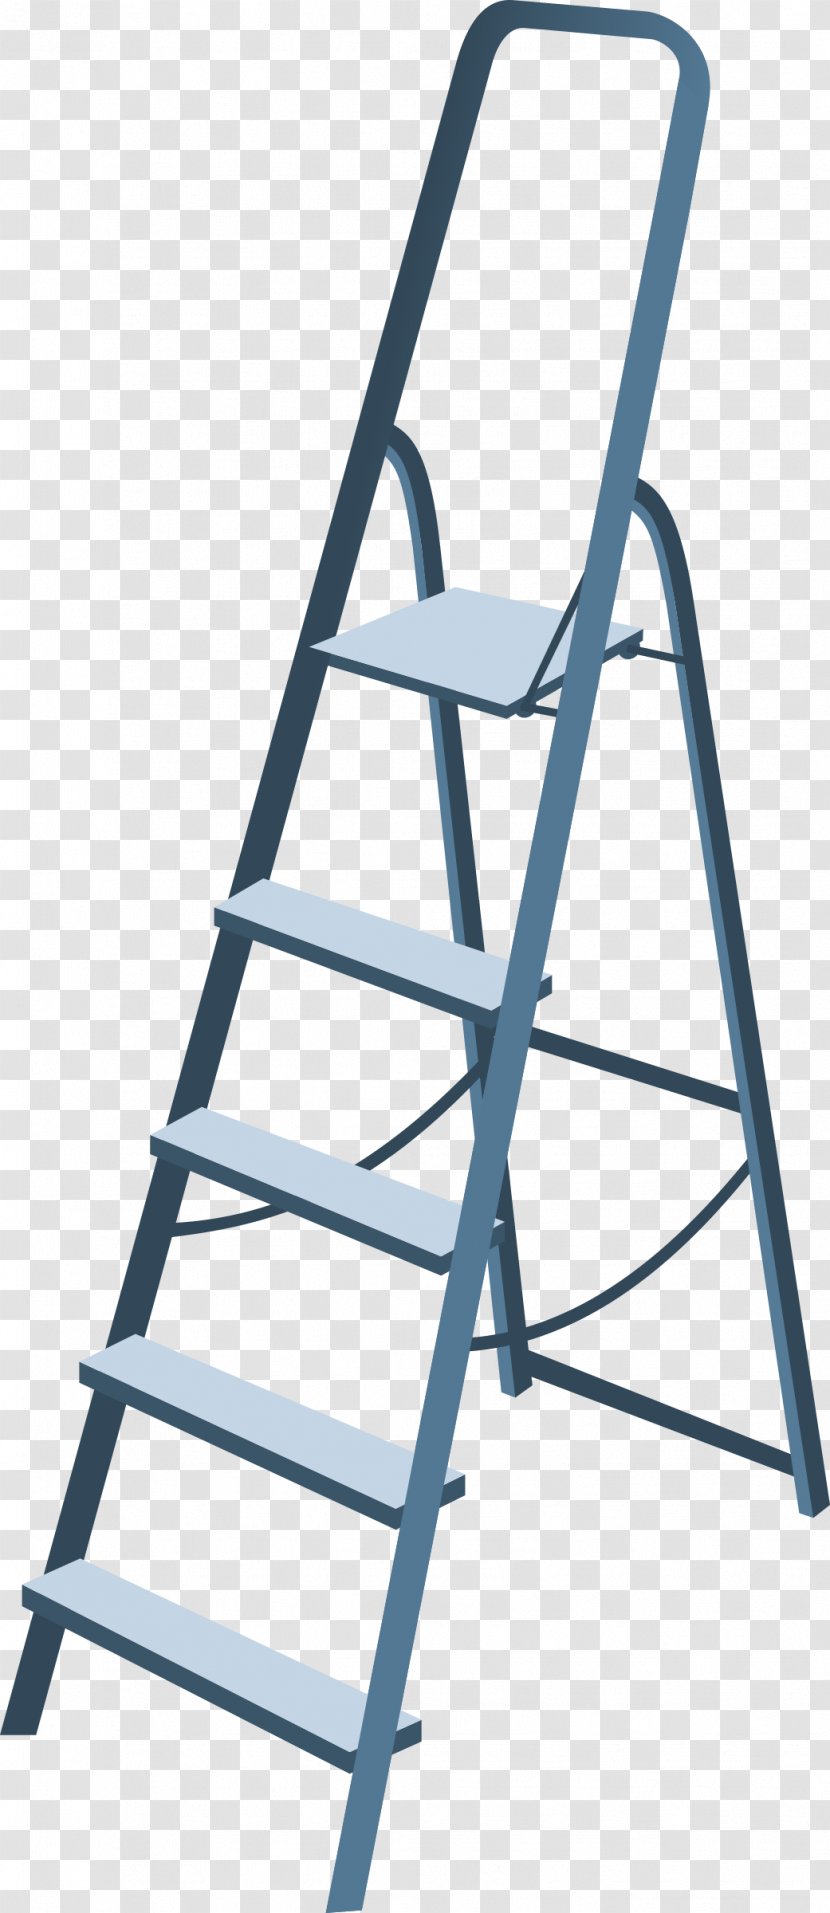 Ladder Stairs Stair Riser Rozetka Price - Chair Transparent PNG